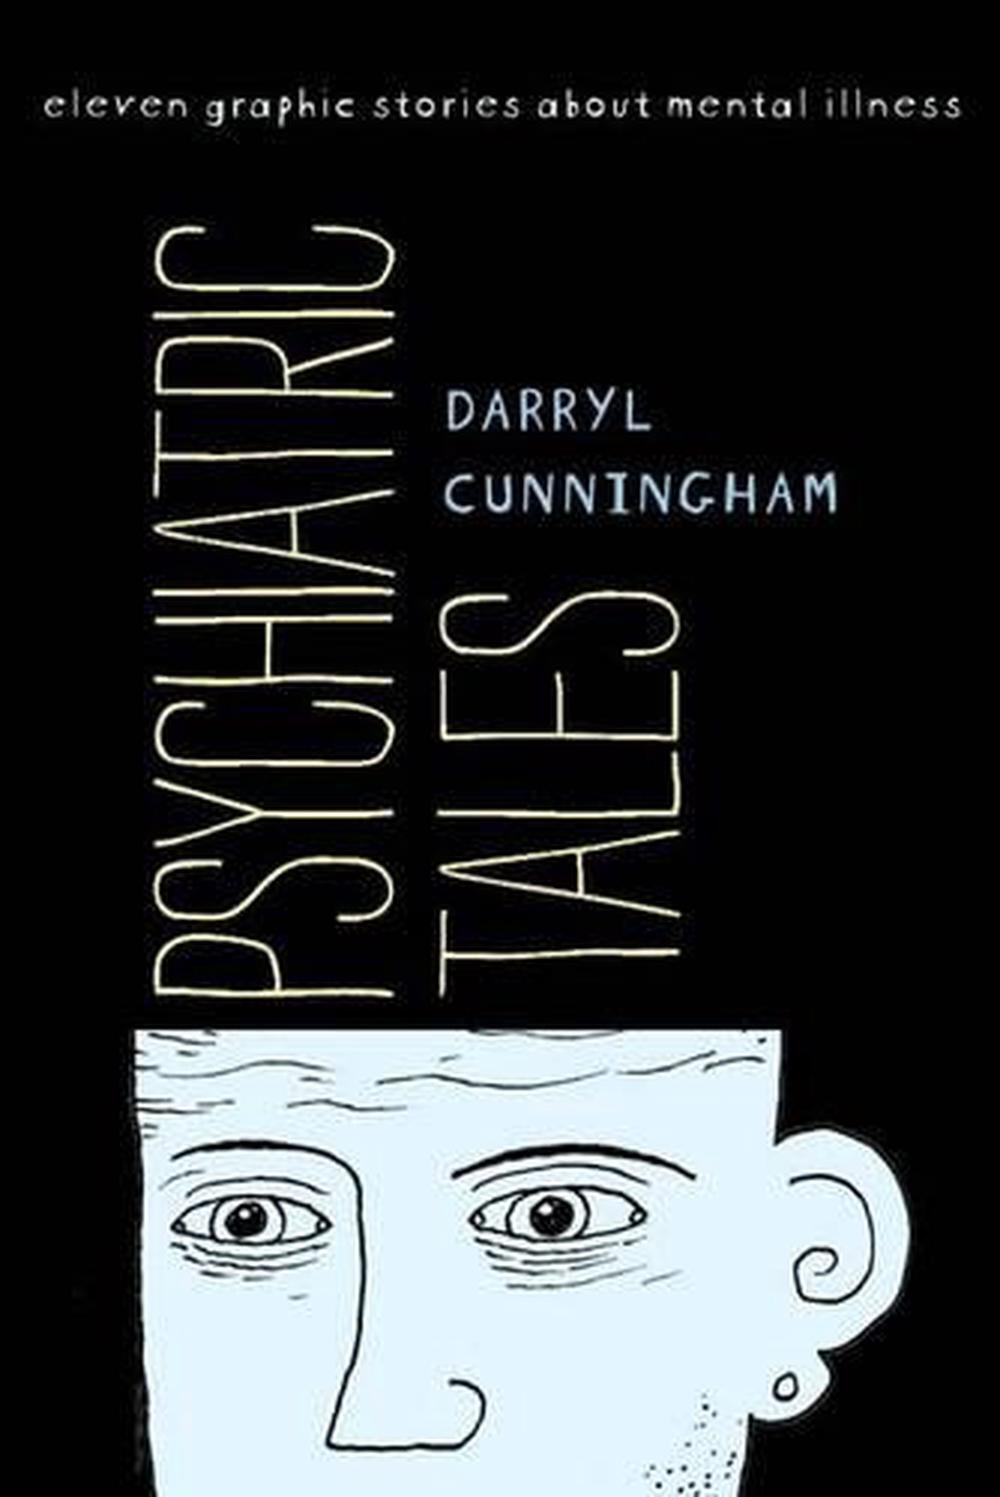 Psychiatric Tales: Eleven Graphic Stories about Mental Illness by Darryl Cunning